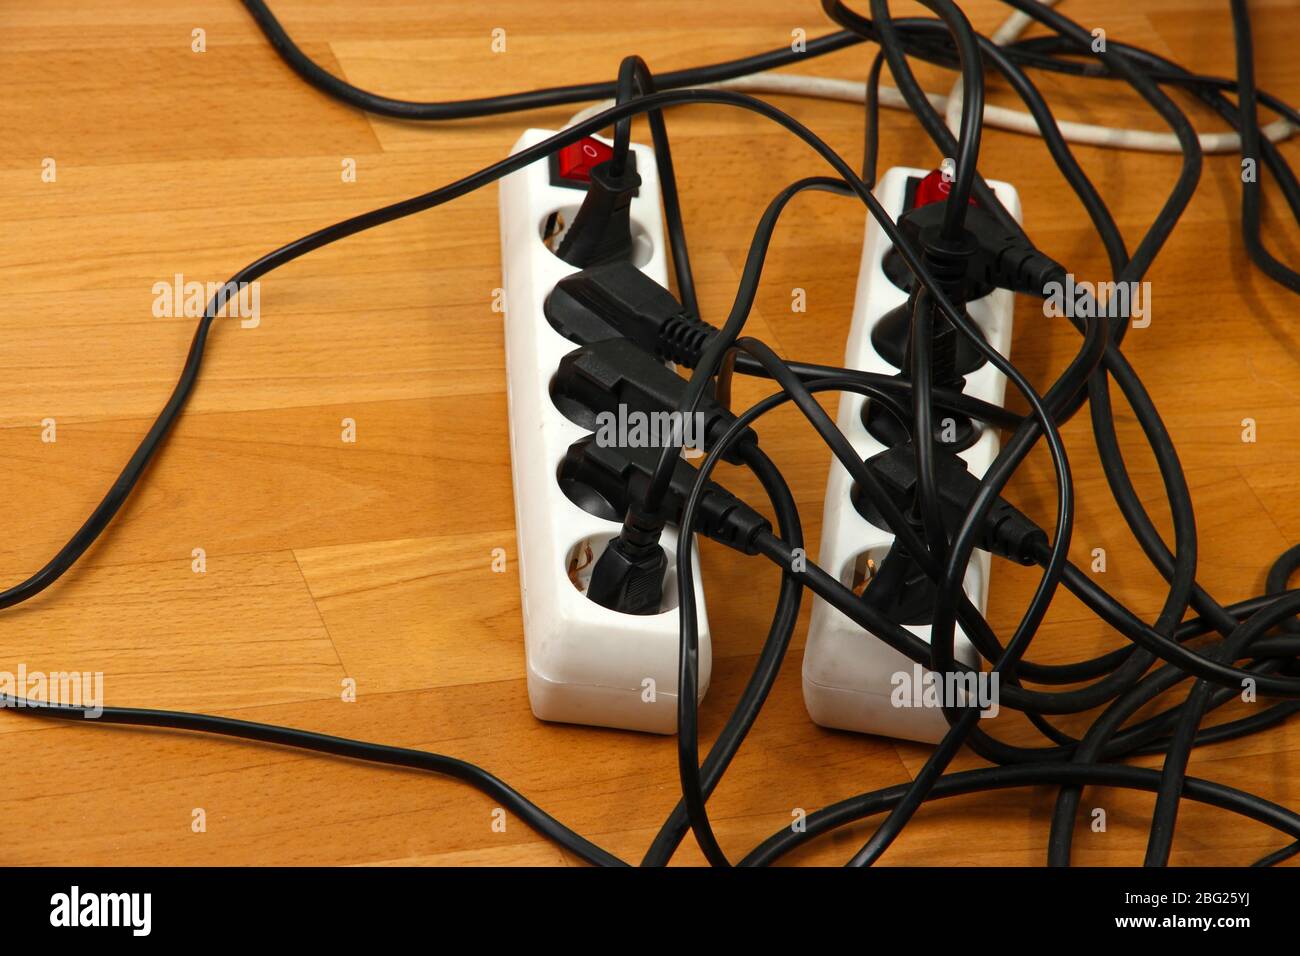 Overloaded power boards, close up Stock Photo